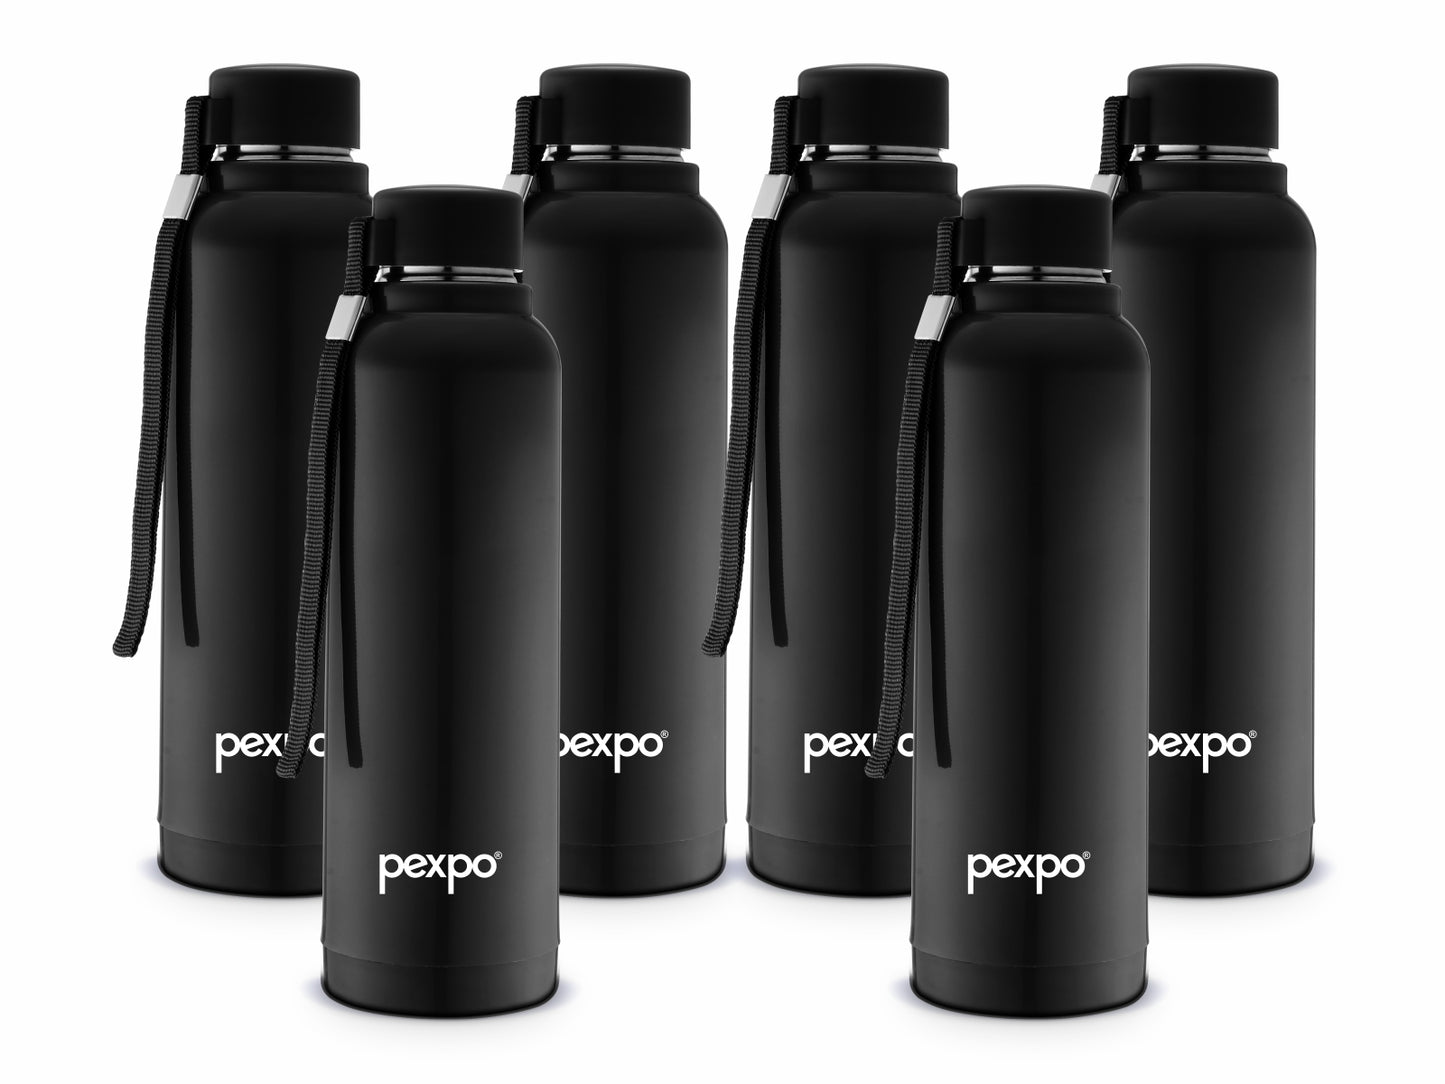 Stereo 900 - PUF Insulated Warm & Cold Stainless Steel Water Bottle